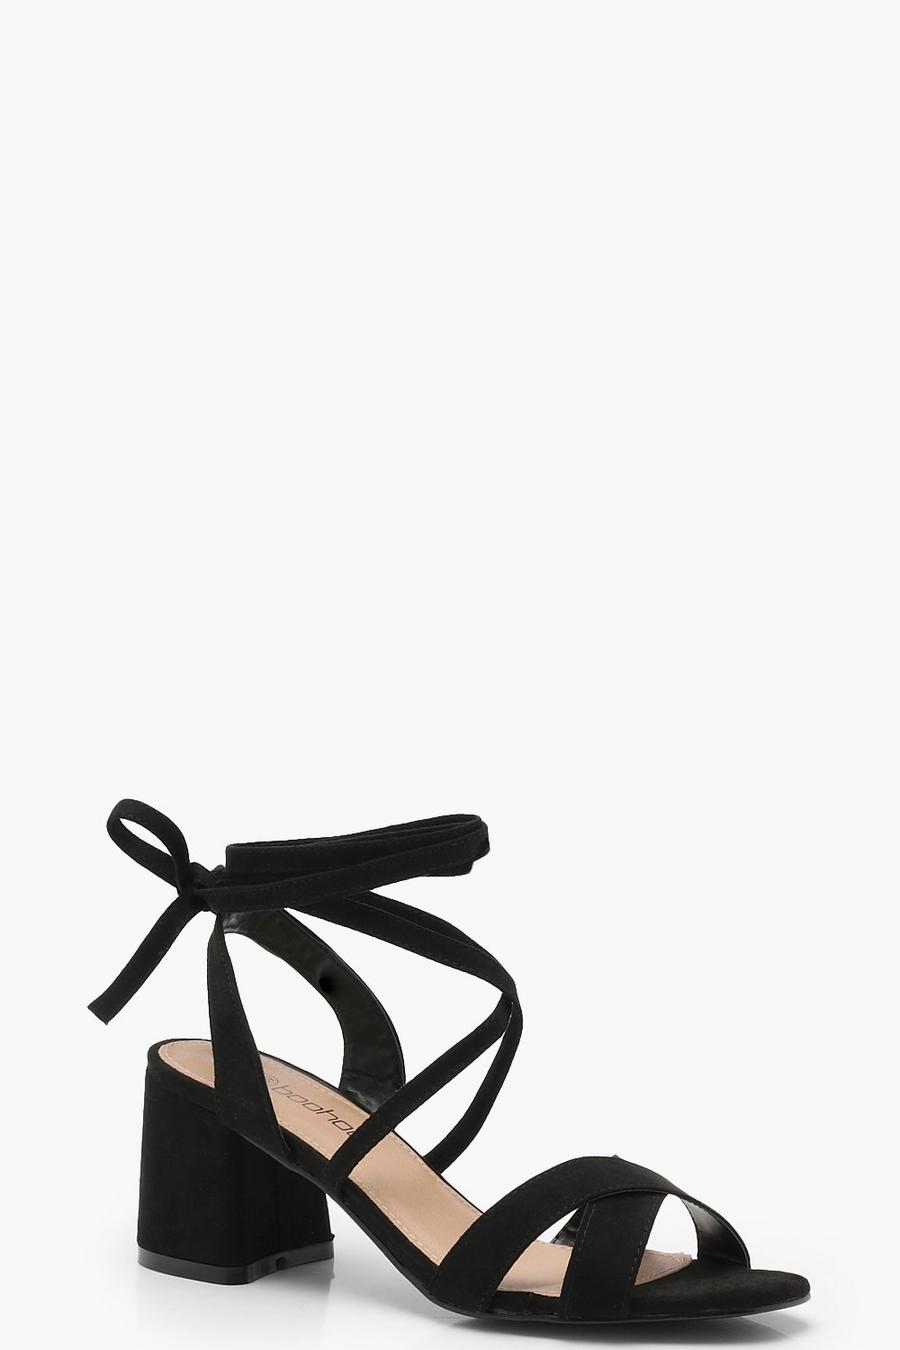 Black Extra Wide Fit Cross Strap Ankle Wrap Heels